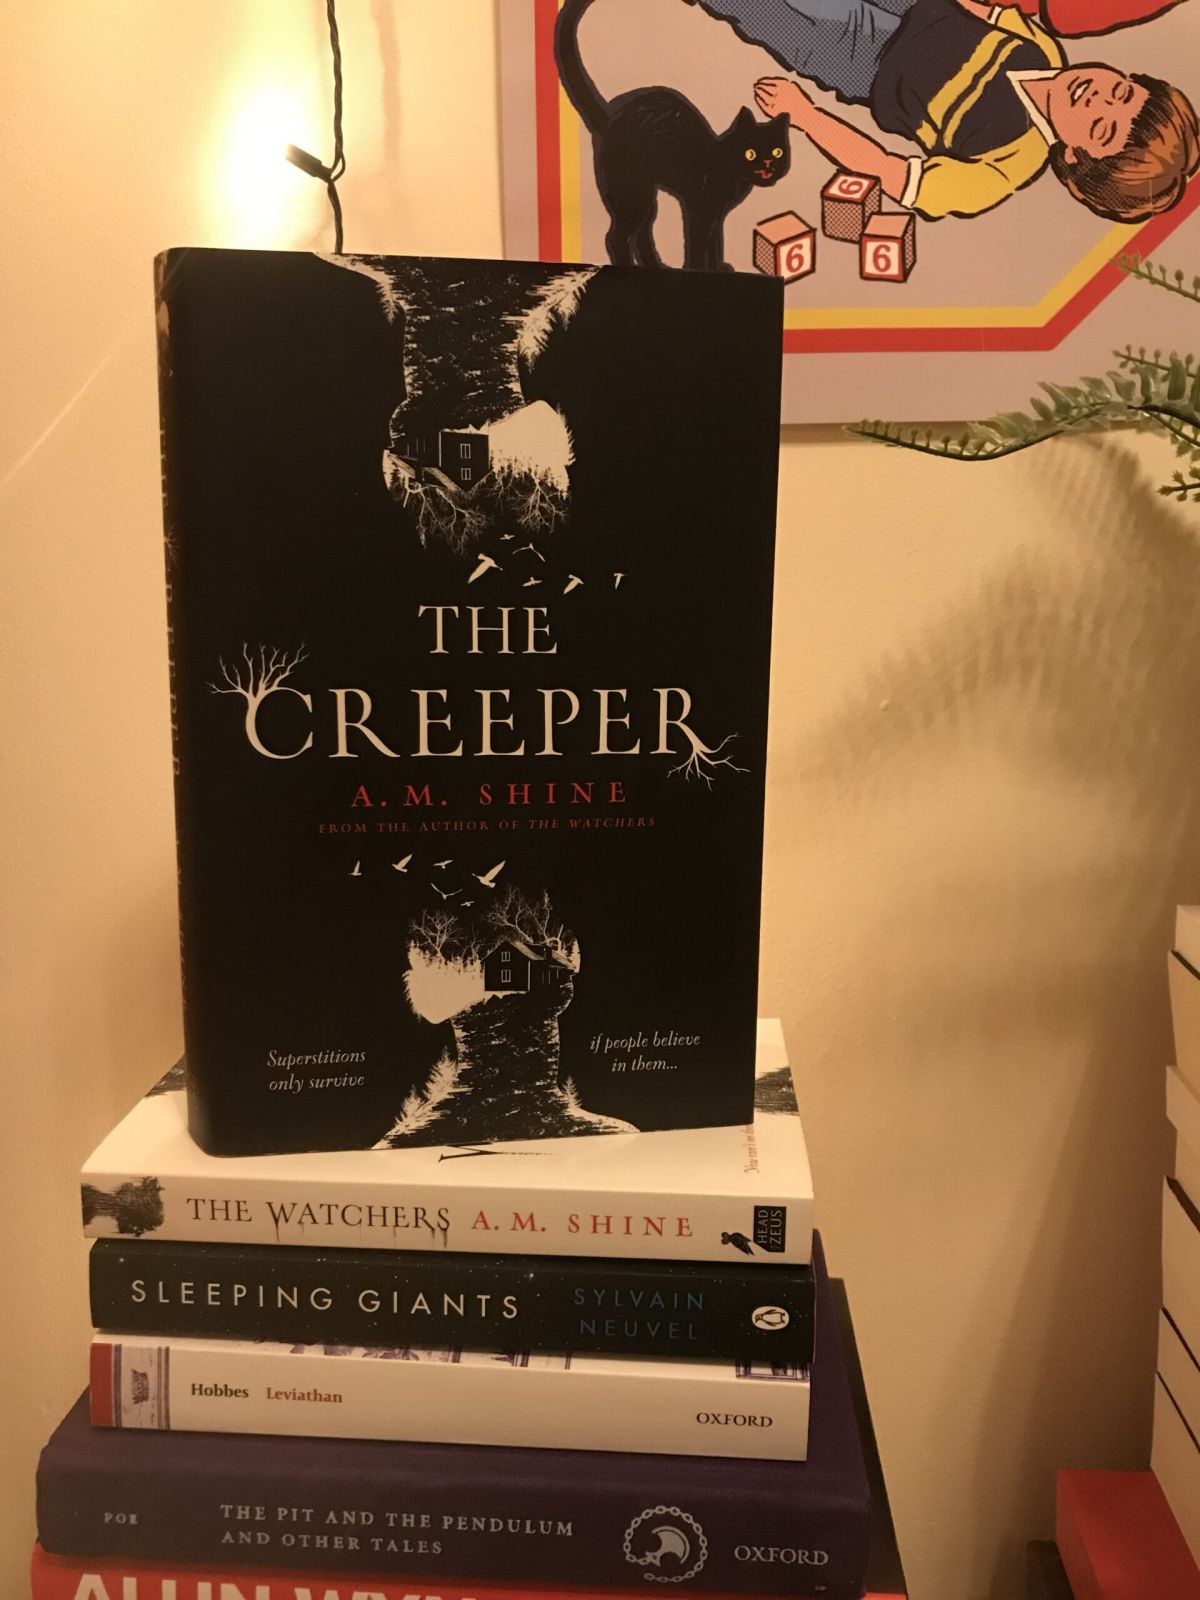 The Creeper review: A chilling second novel by A.M. Shine